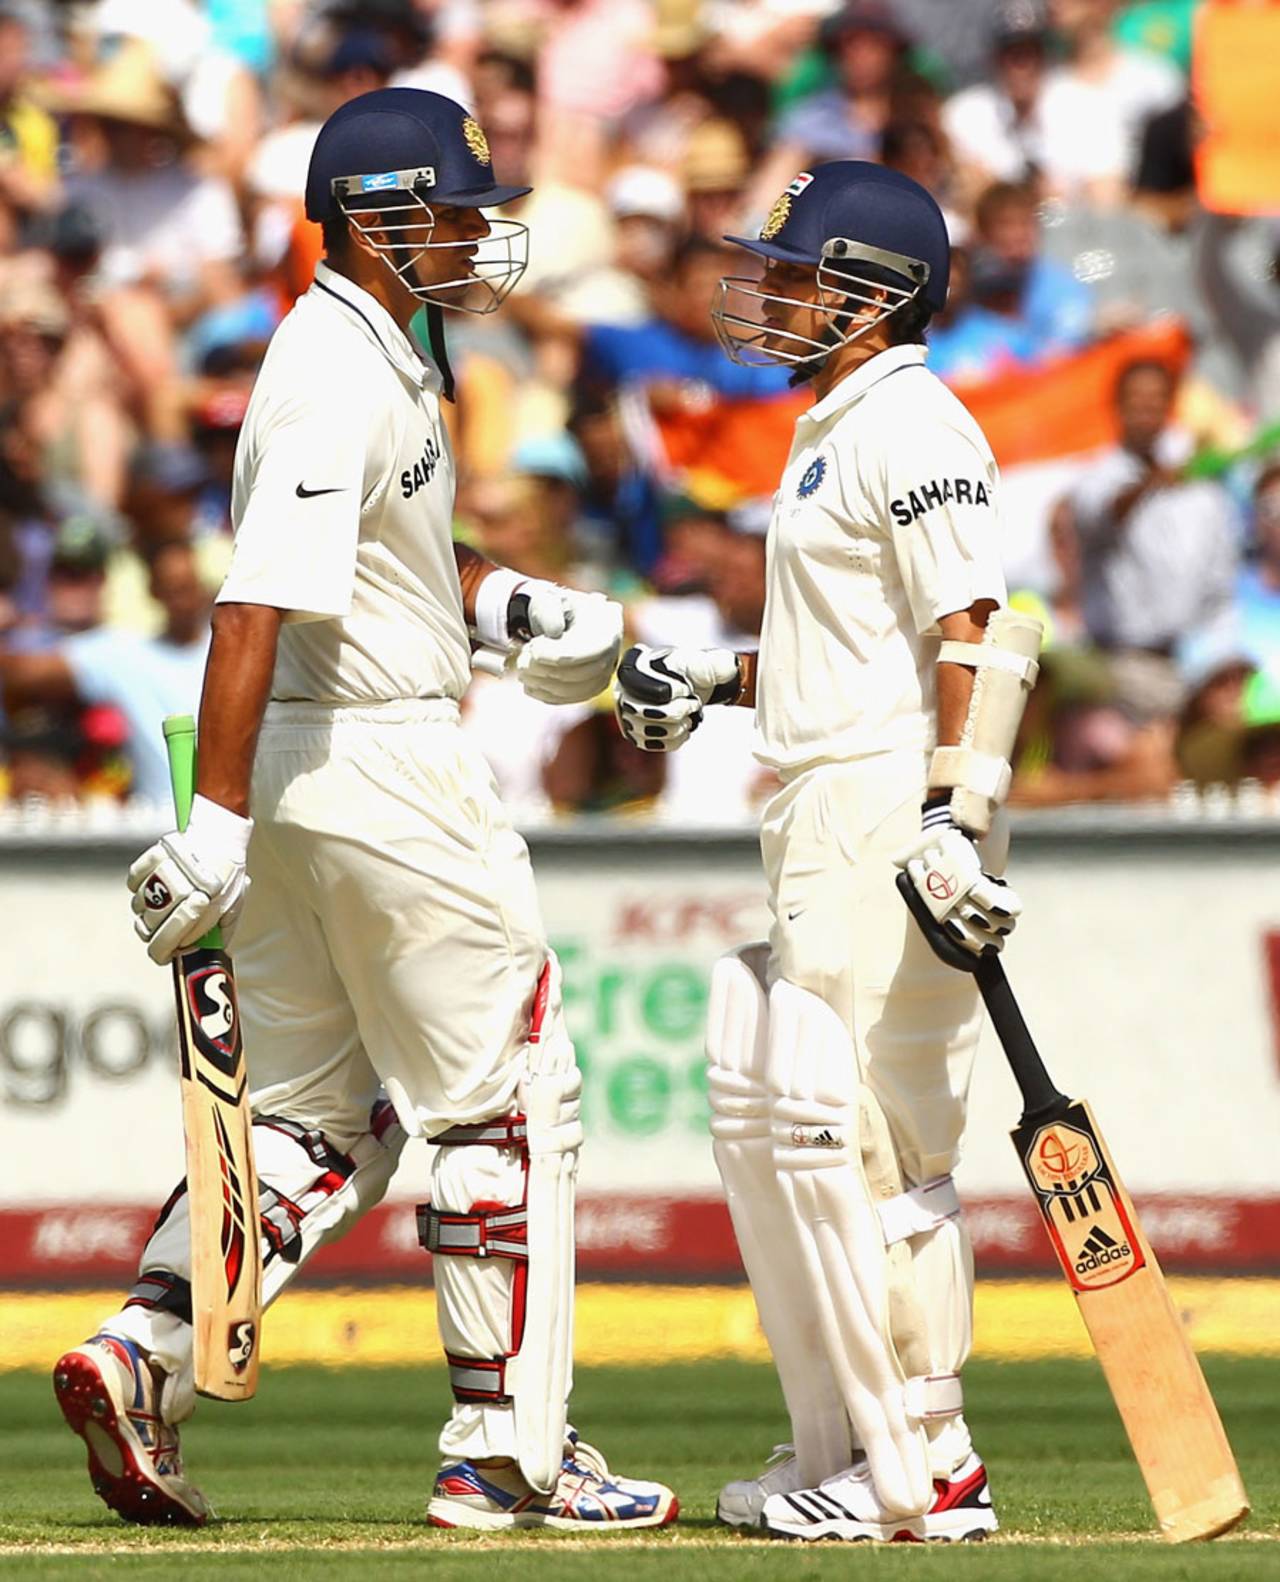 Rahul Dravid and Sachin Tendulkar put on their 20th century stand in Tests, Australia v India, 1st Test, Melbourne, 2nd day, December 27, 2011